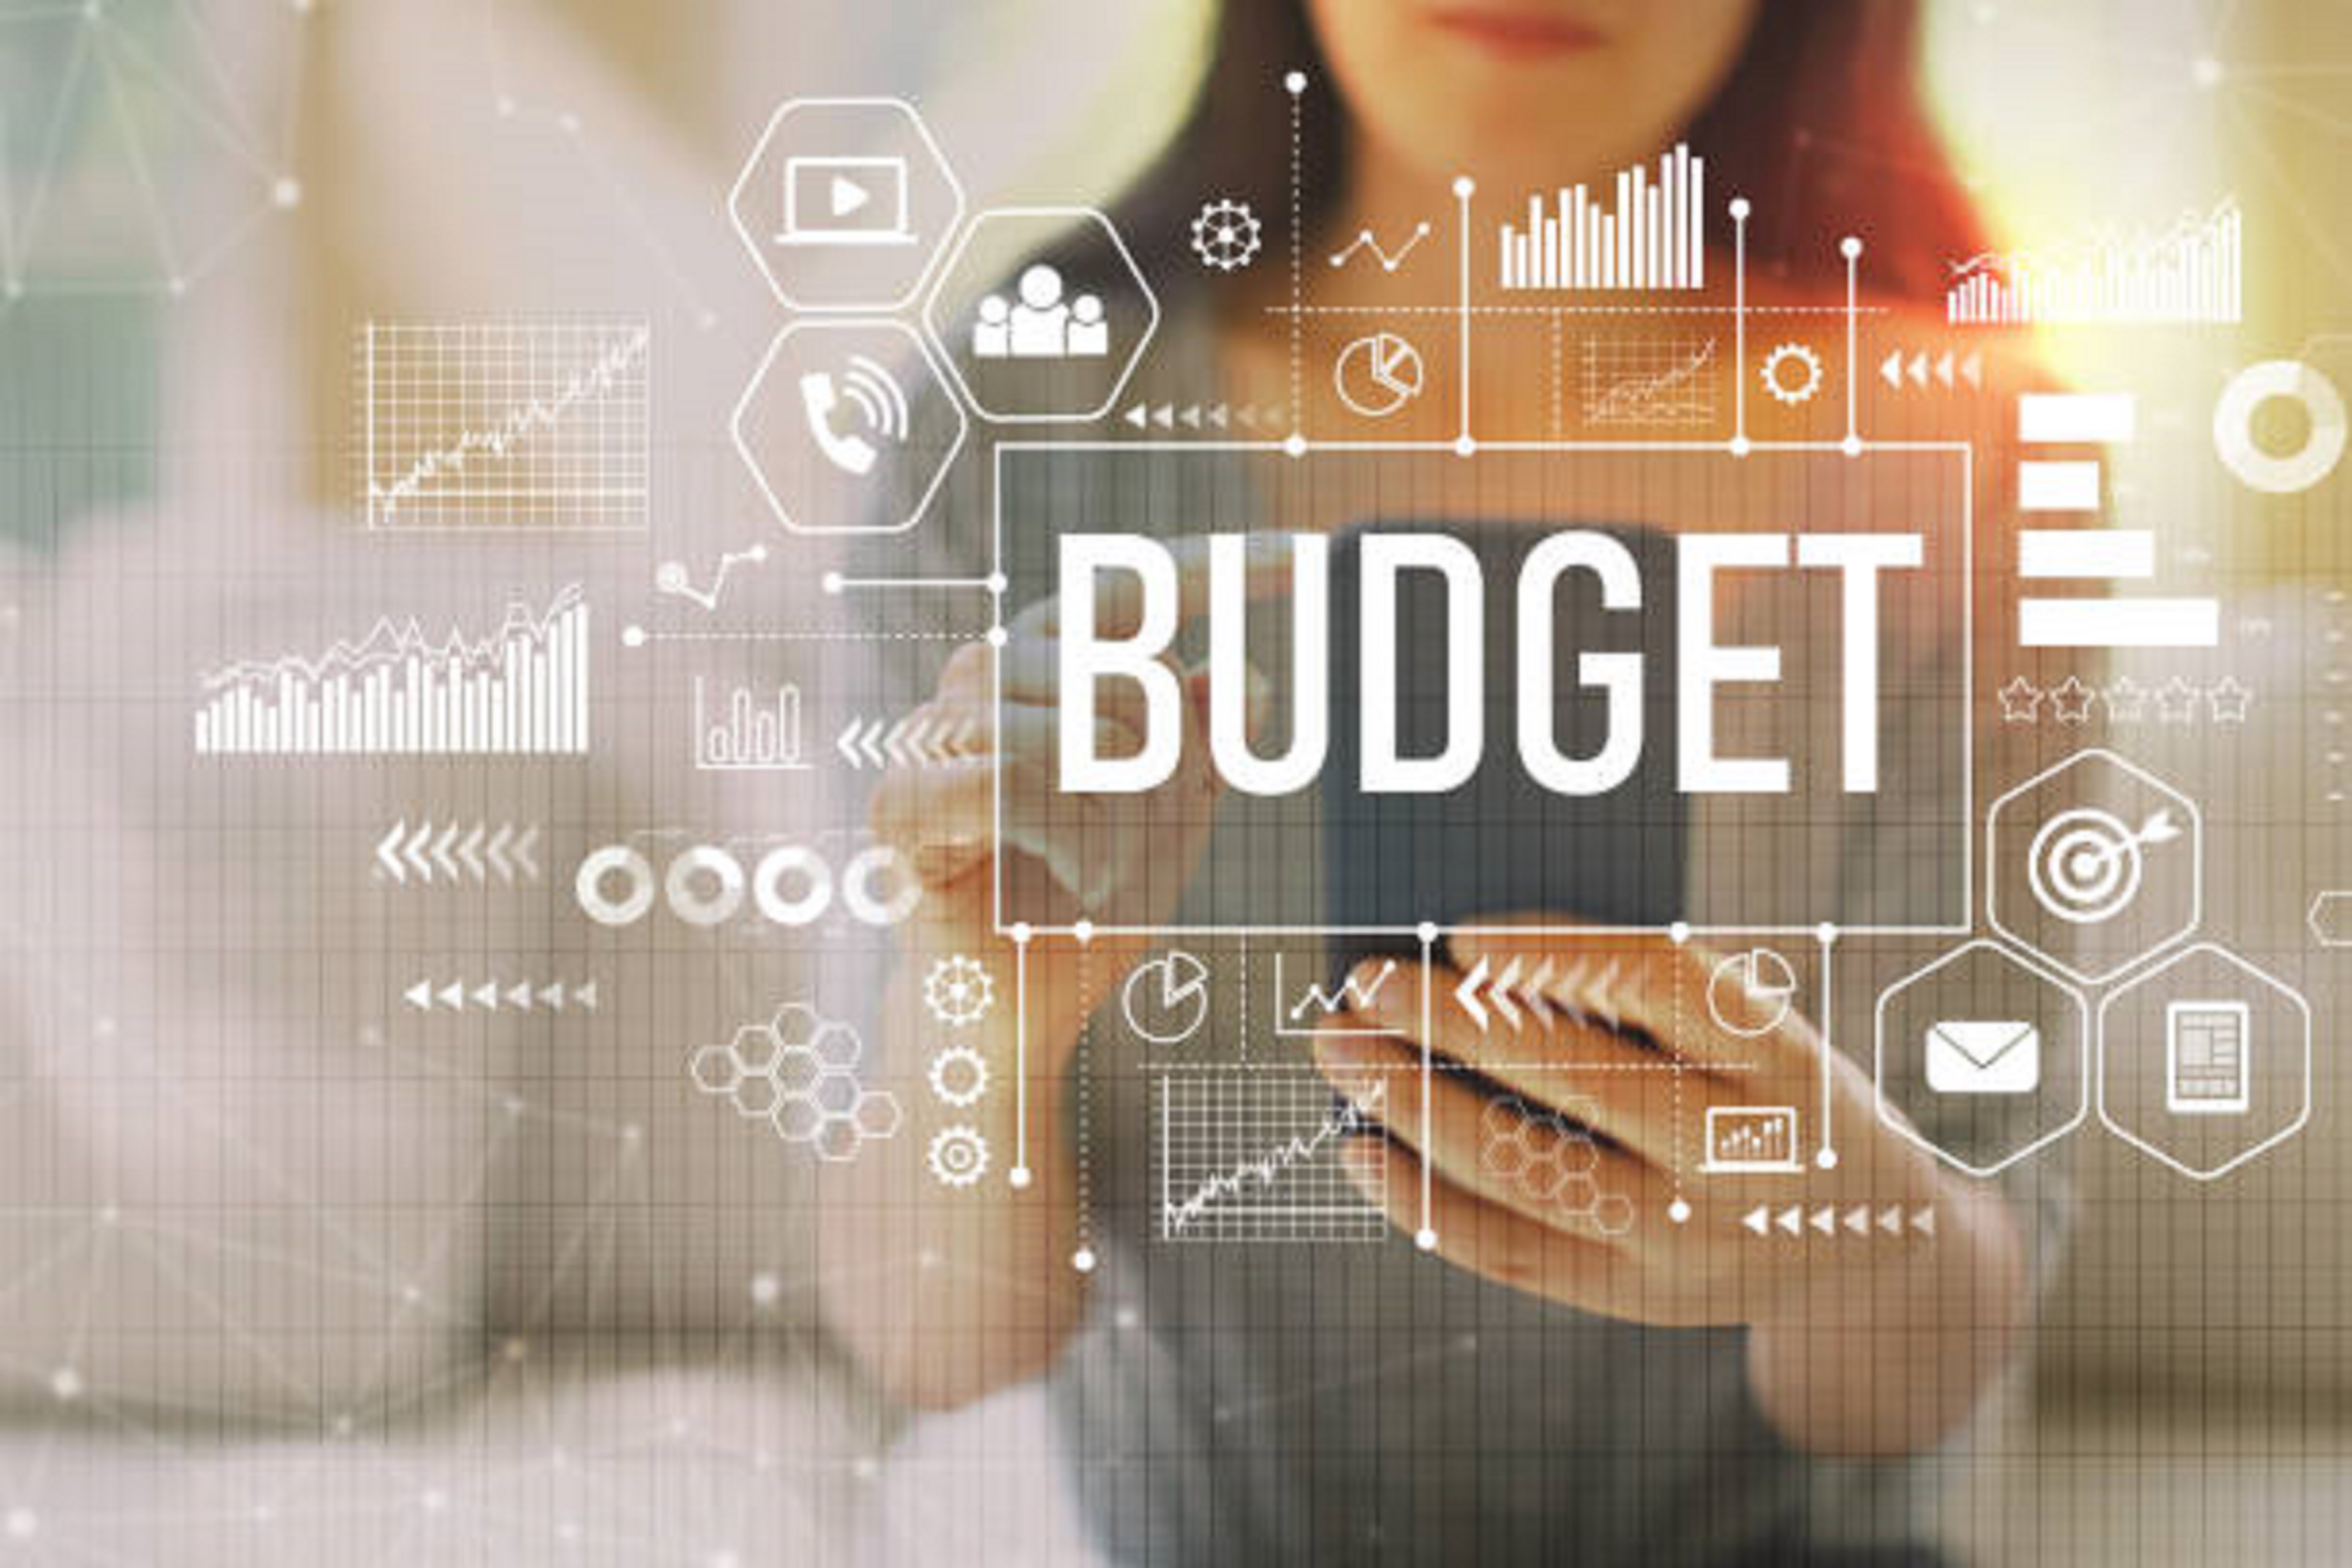 Business Budgeting Software - 6 Benefits To Consider